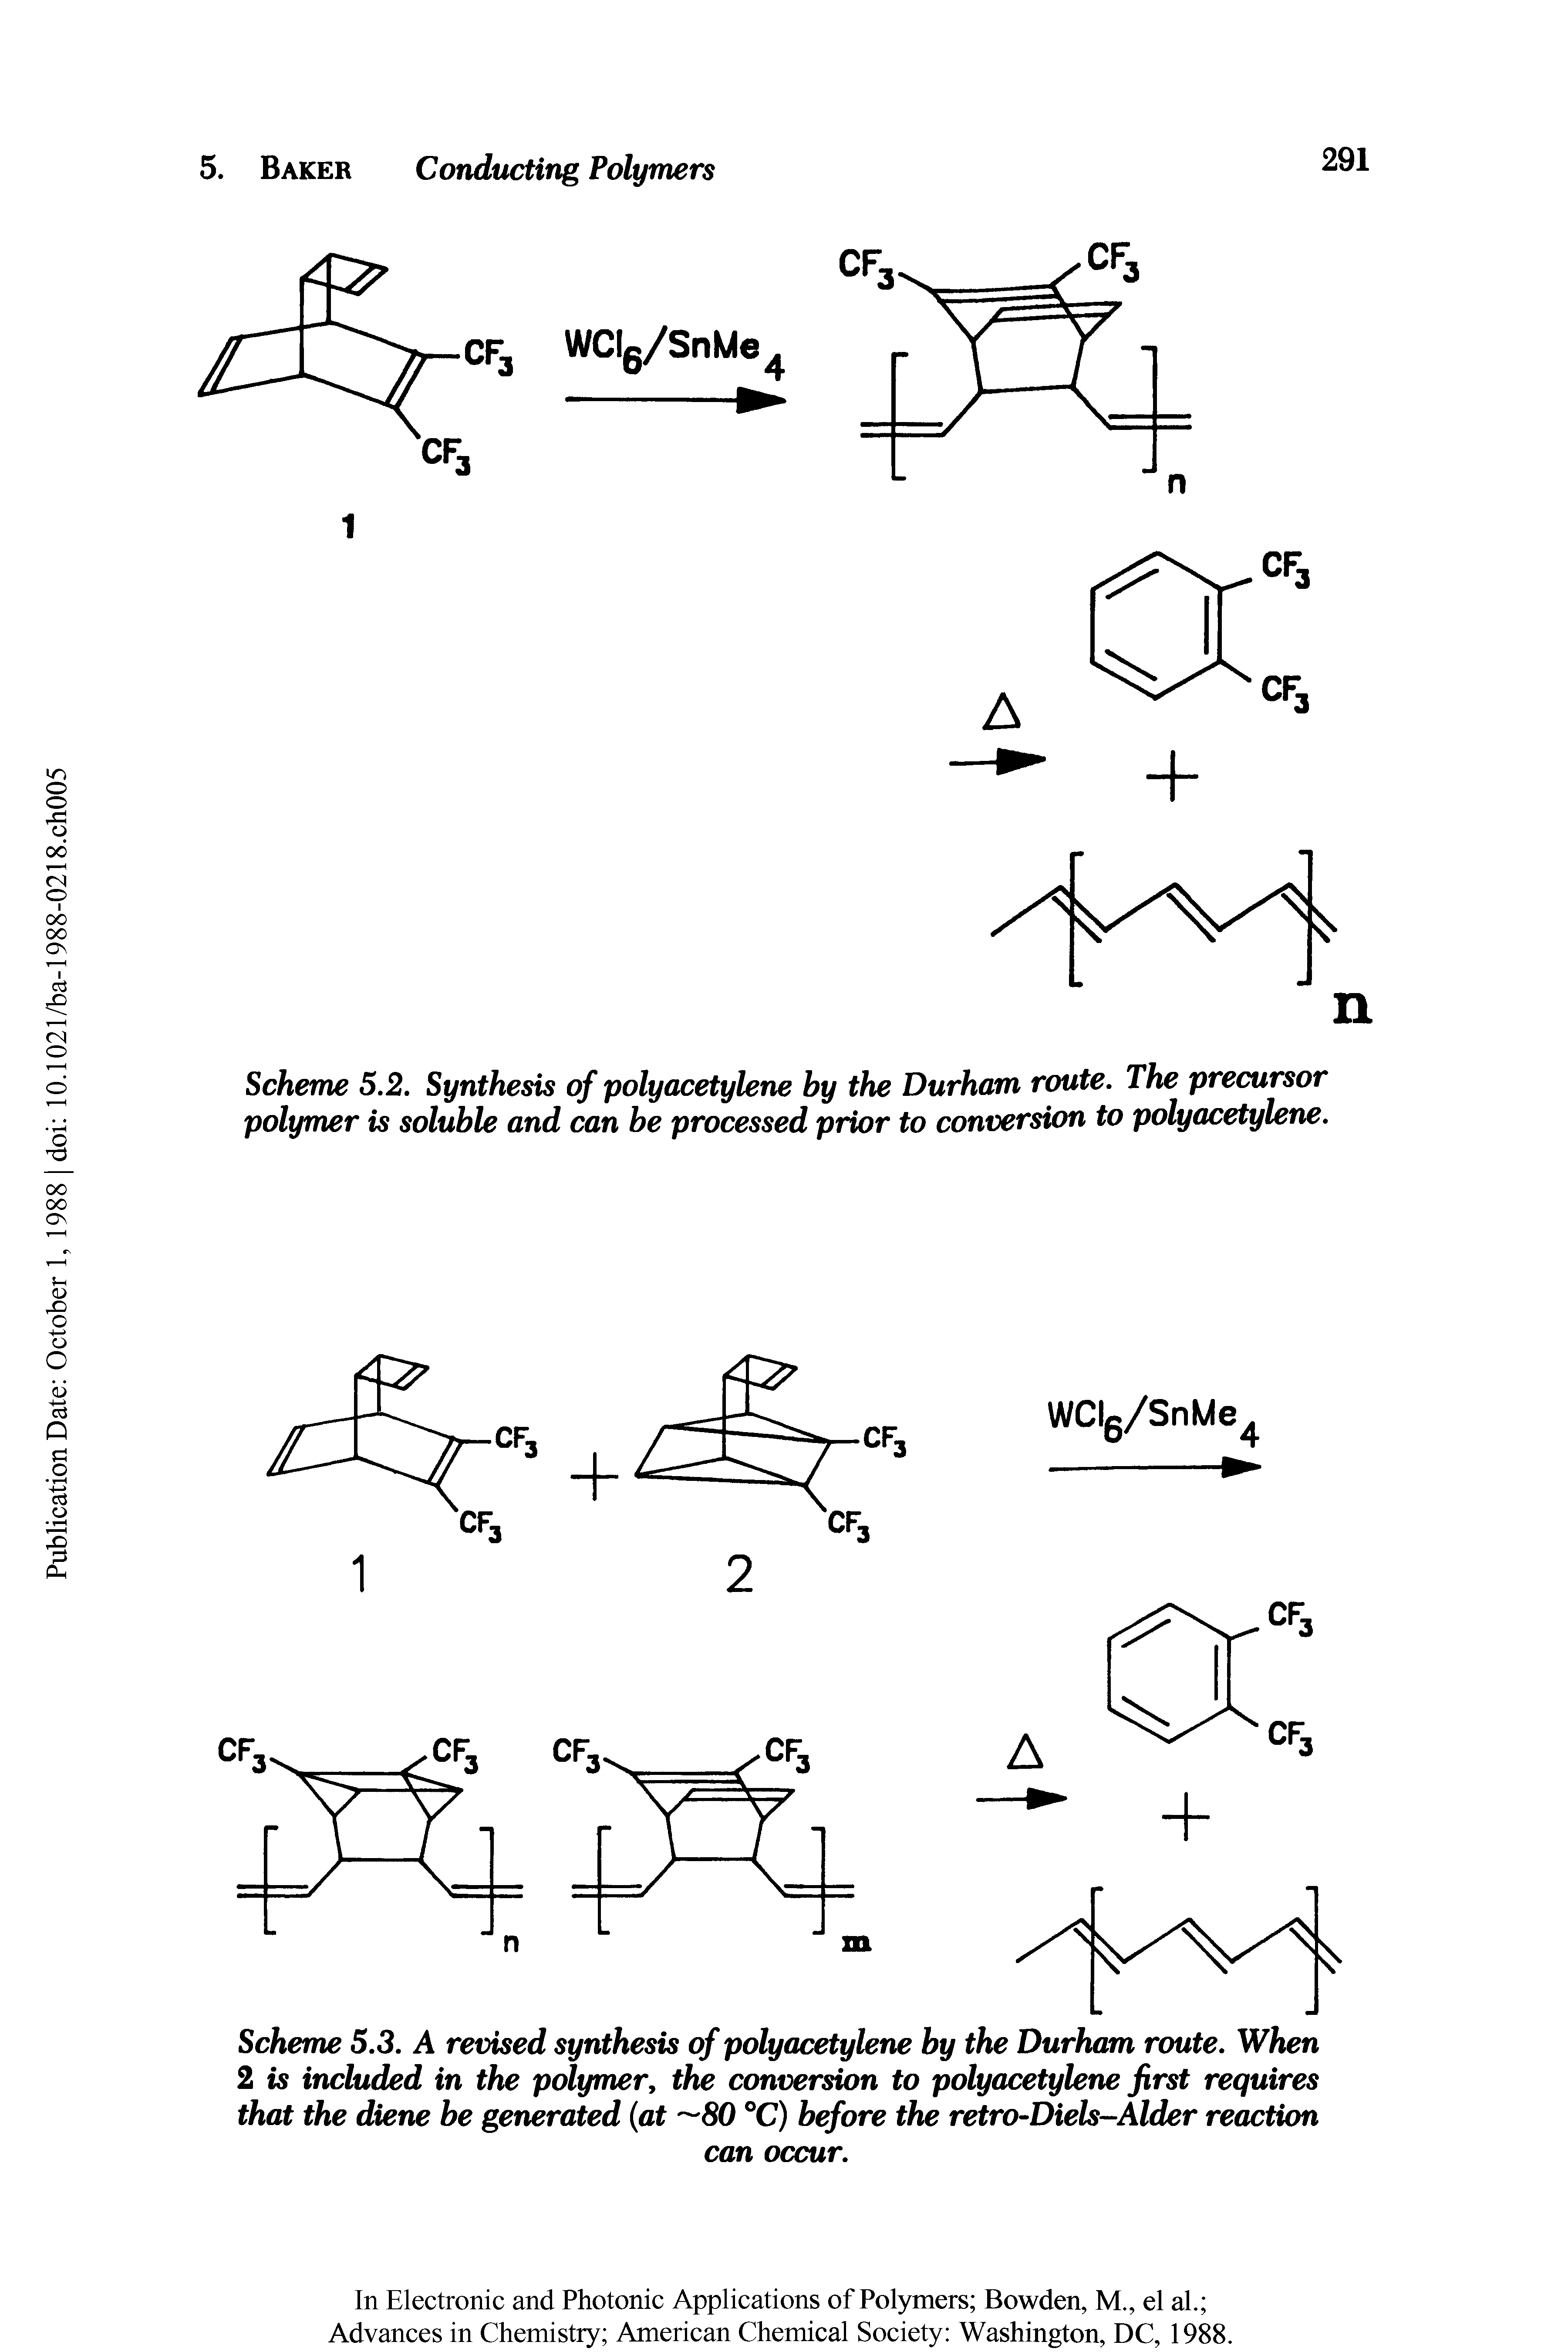 Scheme 5.3. A revised synthesis of polyacetylene by the Durham route. When 2 is included in the polymer, the conversion to polyacetylene first requires that the diene be generated at 80 °C) before the retro-Diels-Alder reaction...